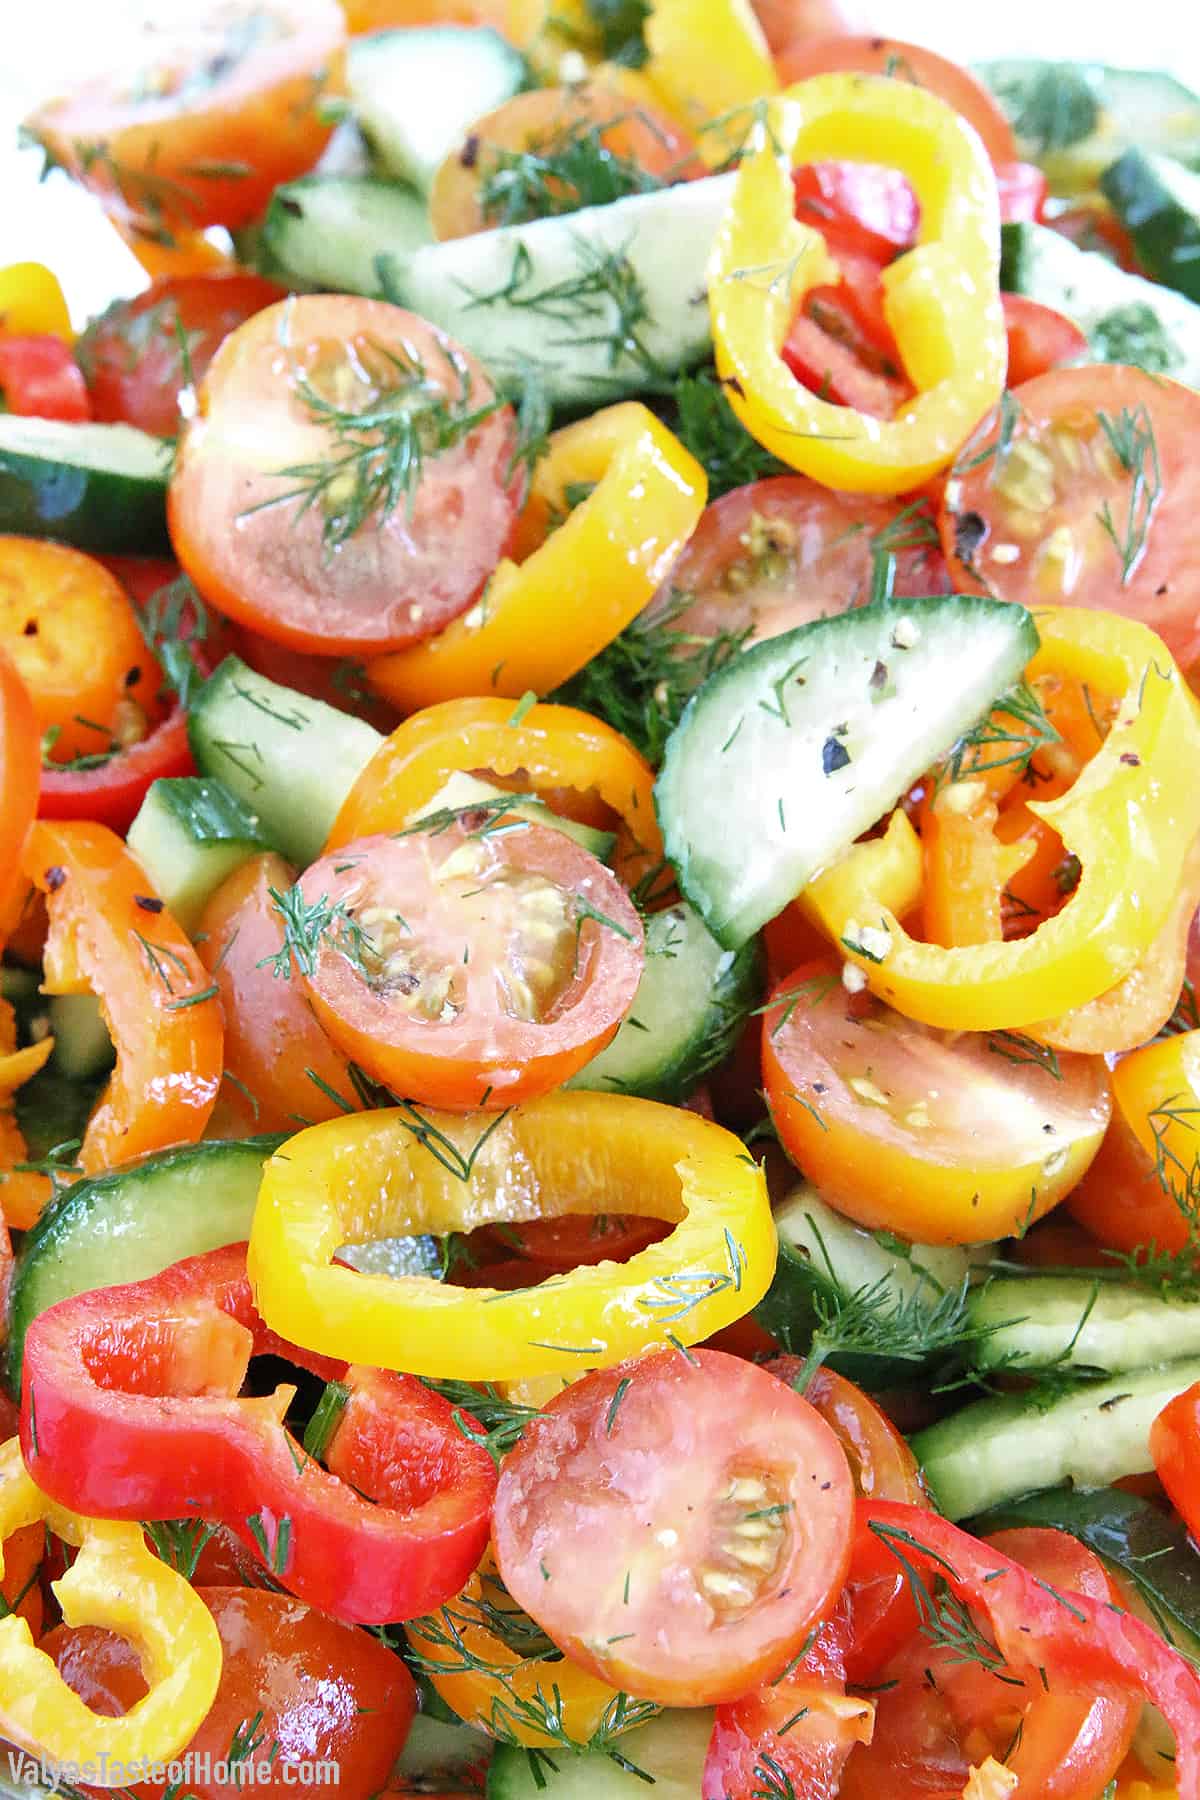 This Sweet Pepper Tomato Cucumber Salad is crunchy, soft, sharp, smooth, aromatic, and savory!